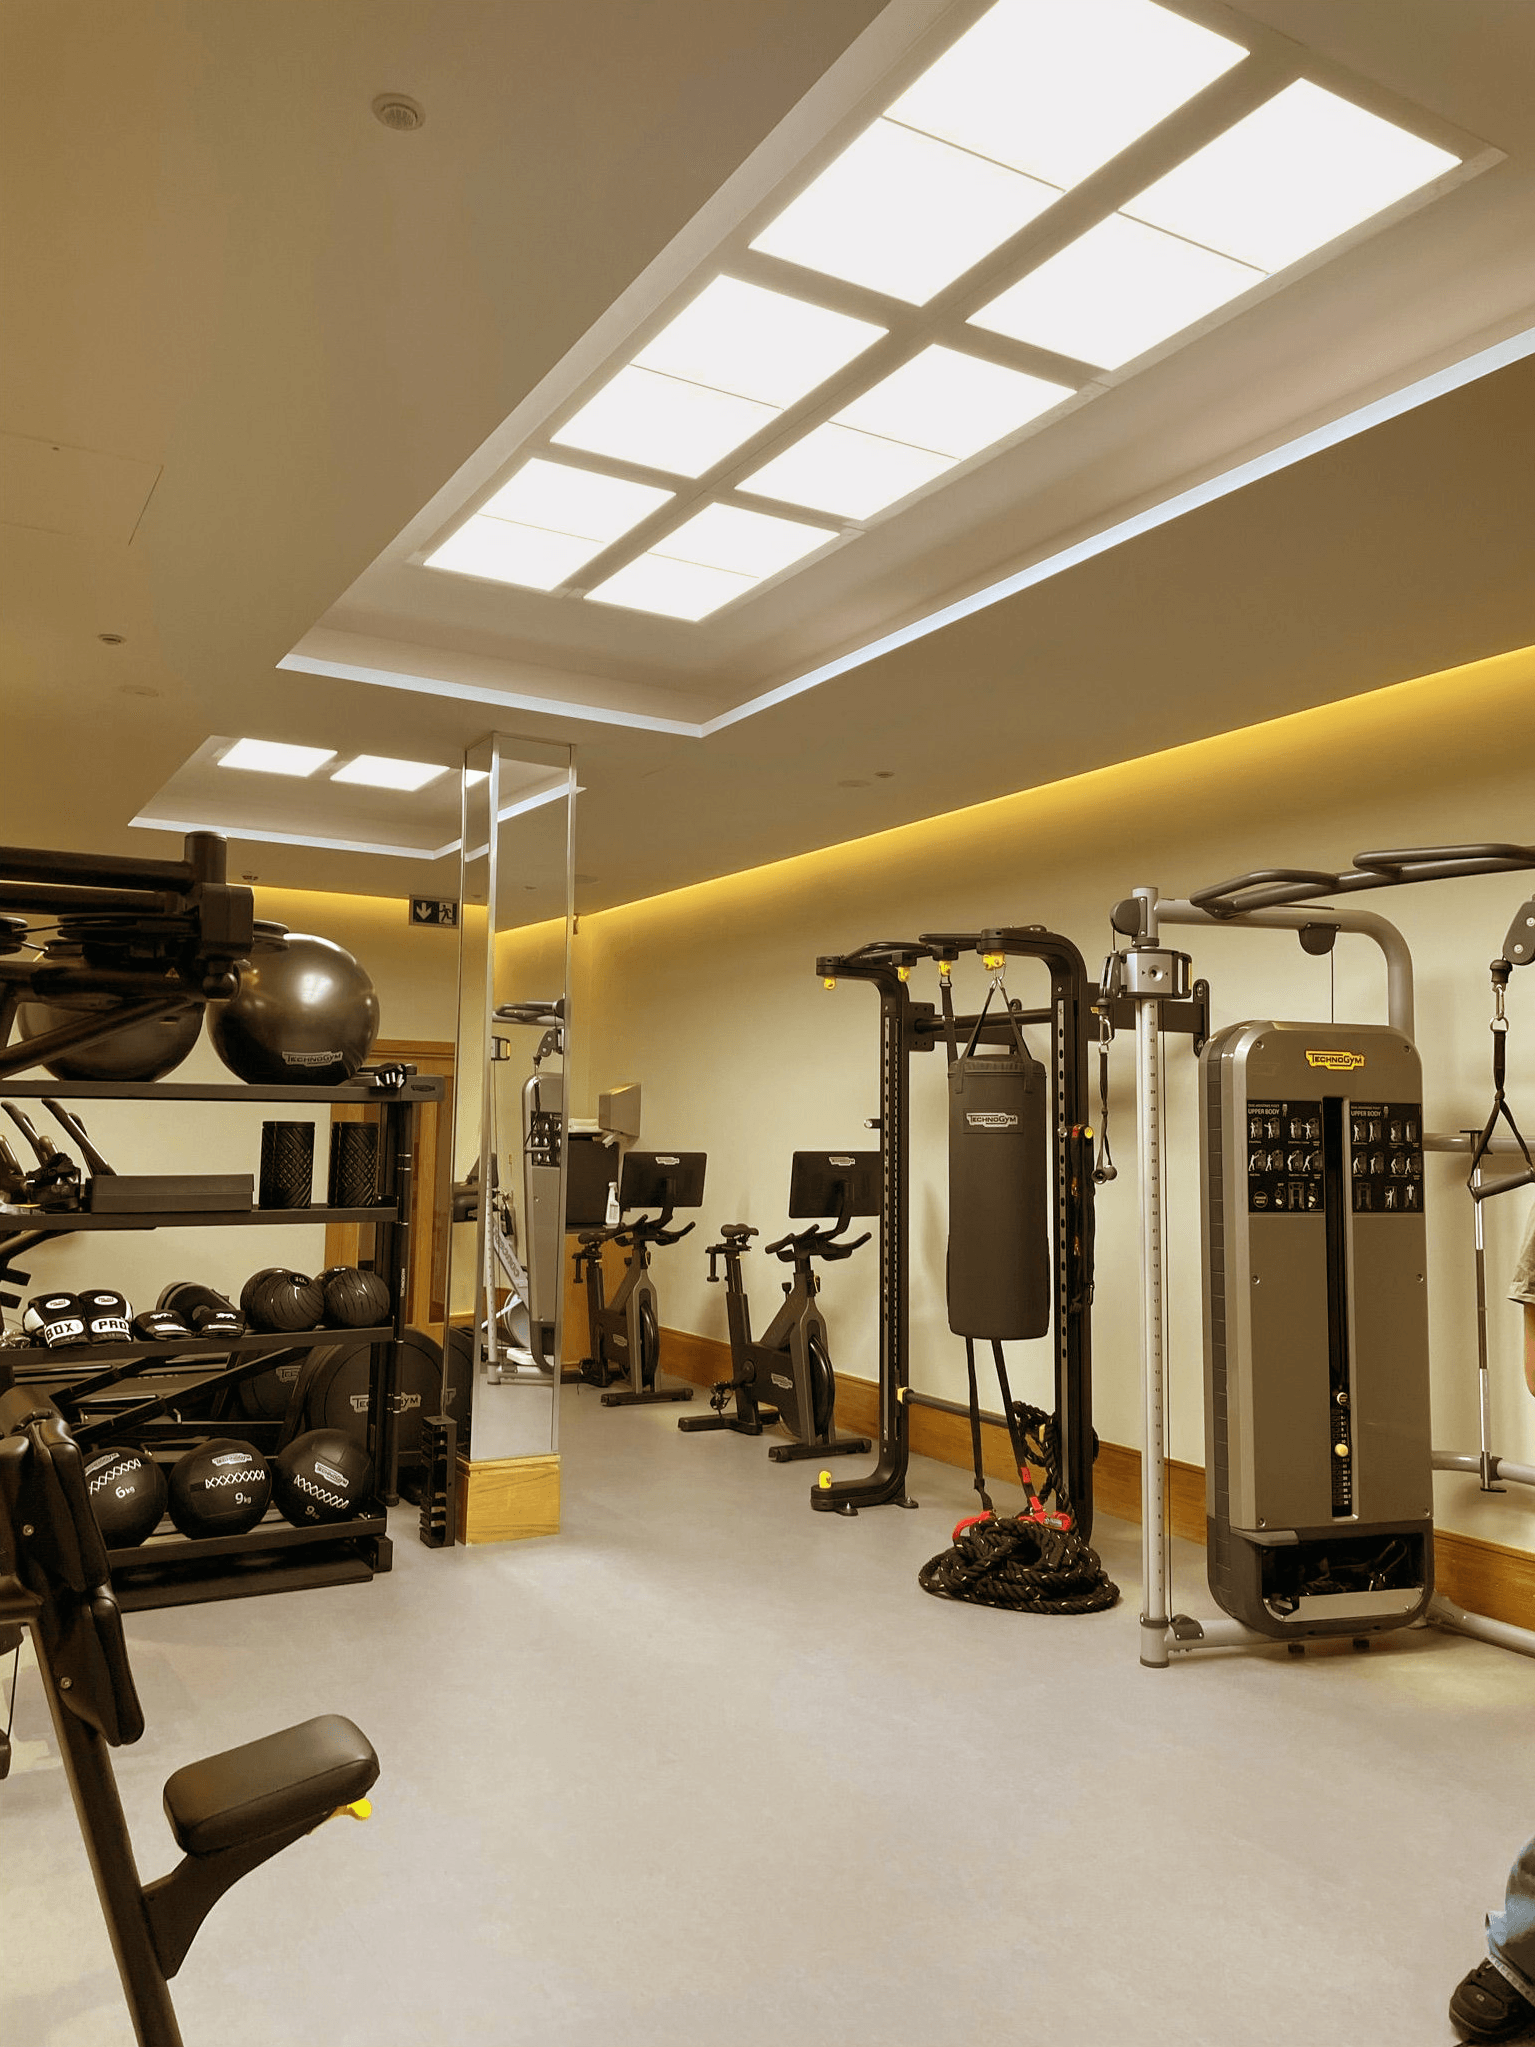 Innerscene Virtual Sun installation case study warm lighting above exercise machines at Aman Spa The Connaught Hotel London